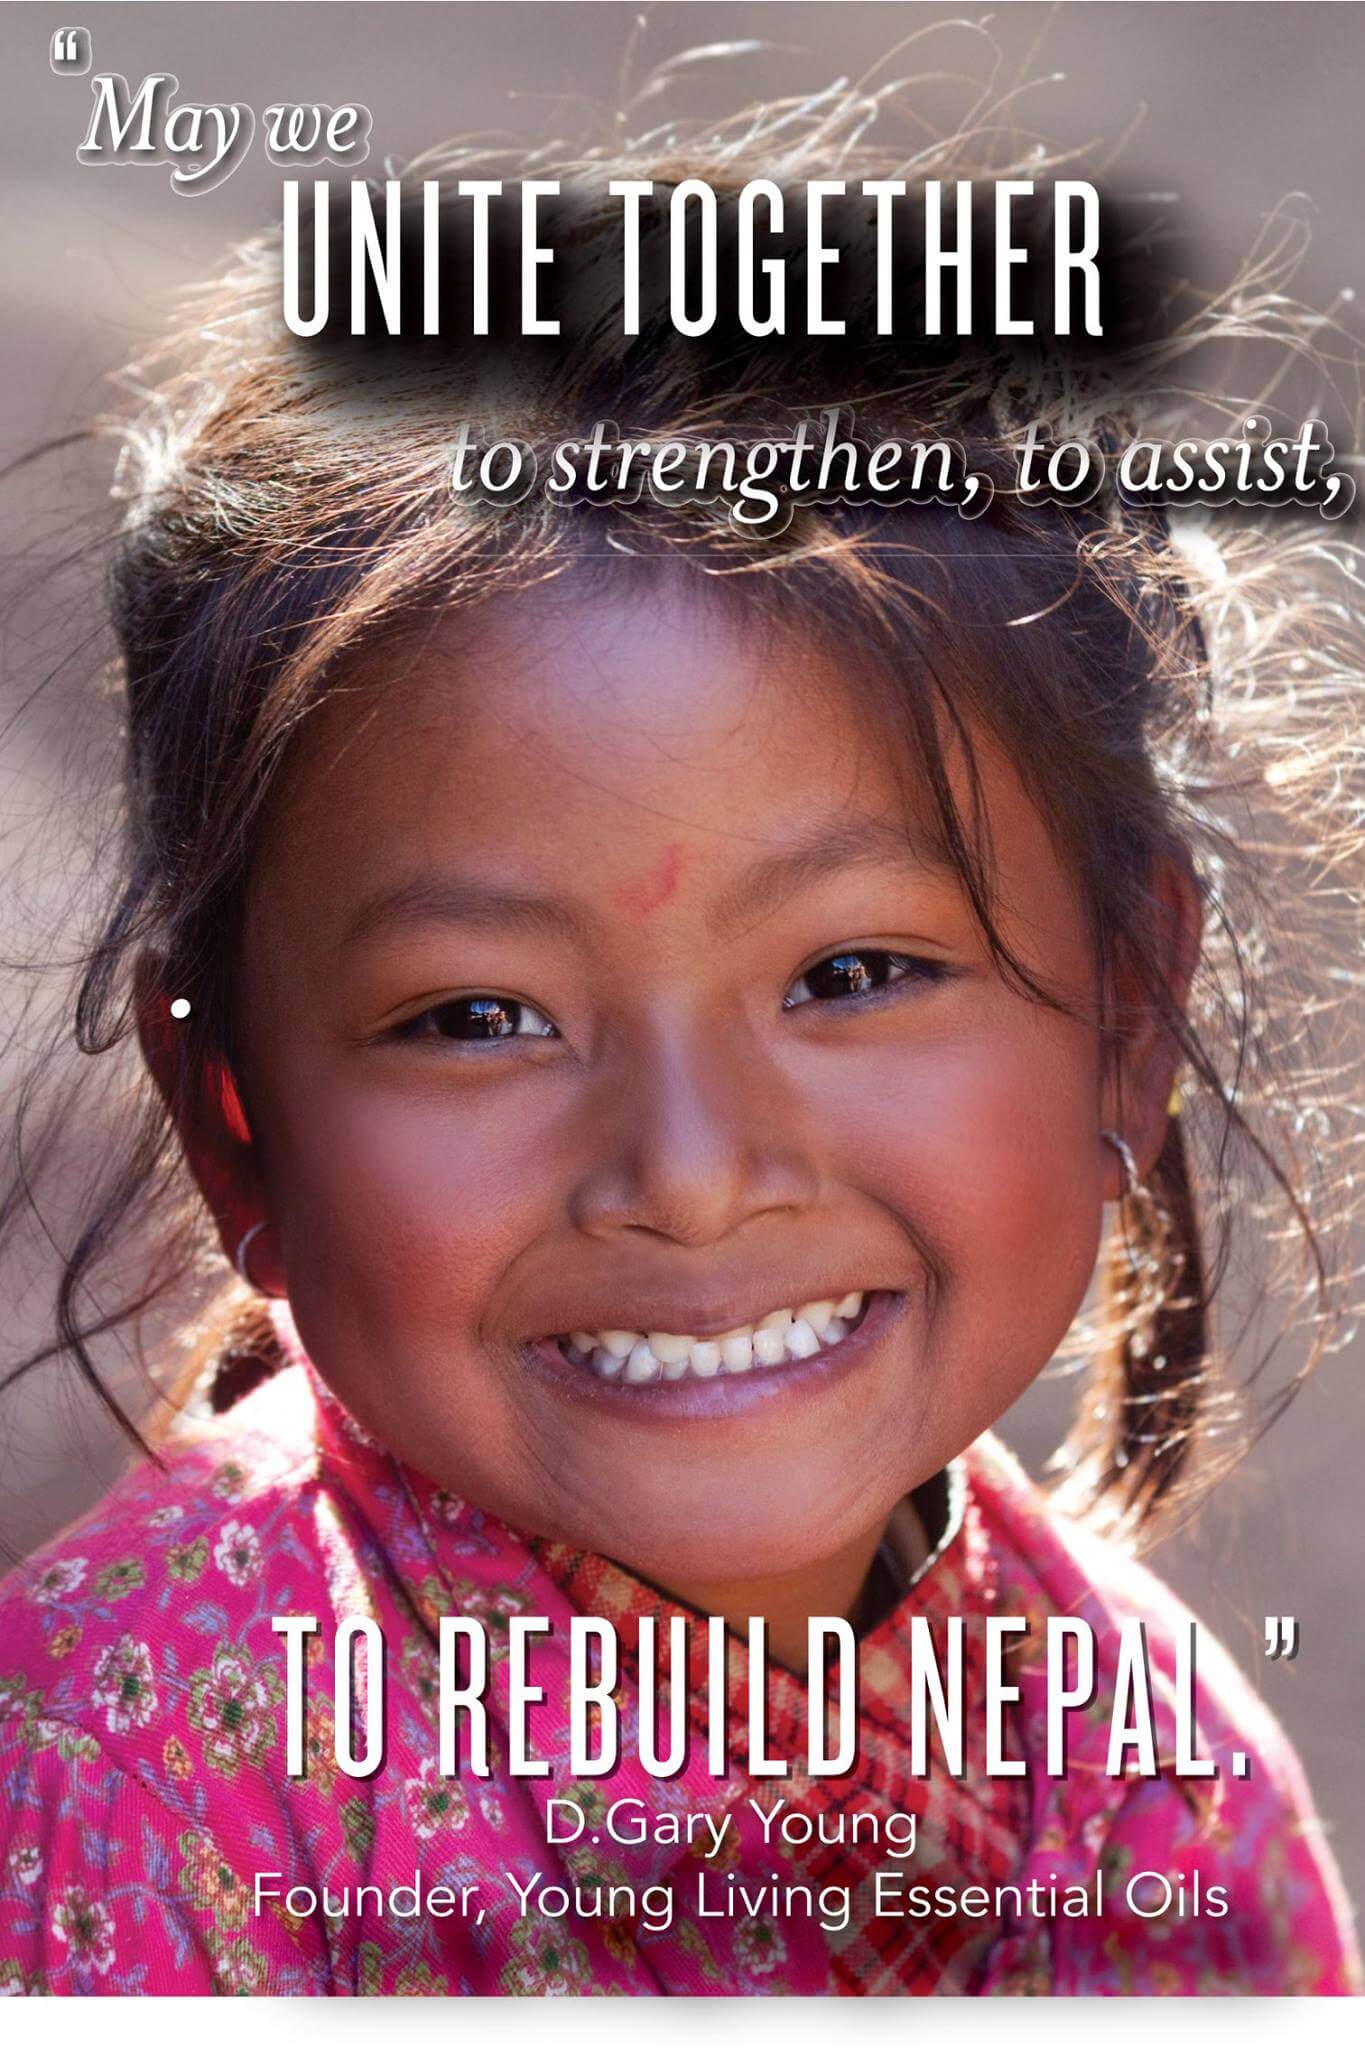 Rebuild Nepal - Oh Lardy's Spring Giving Project